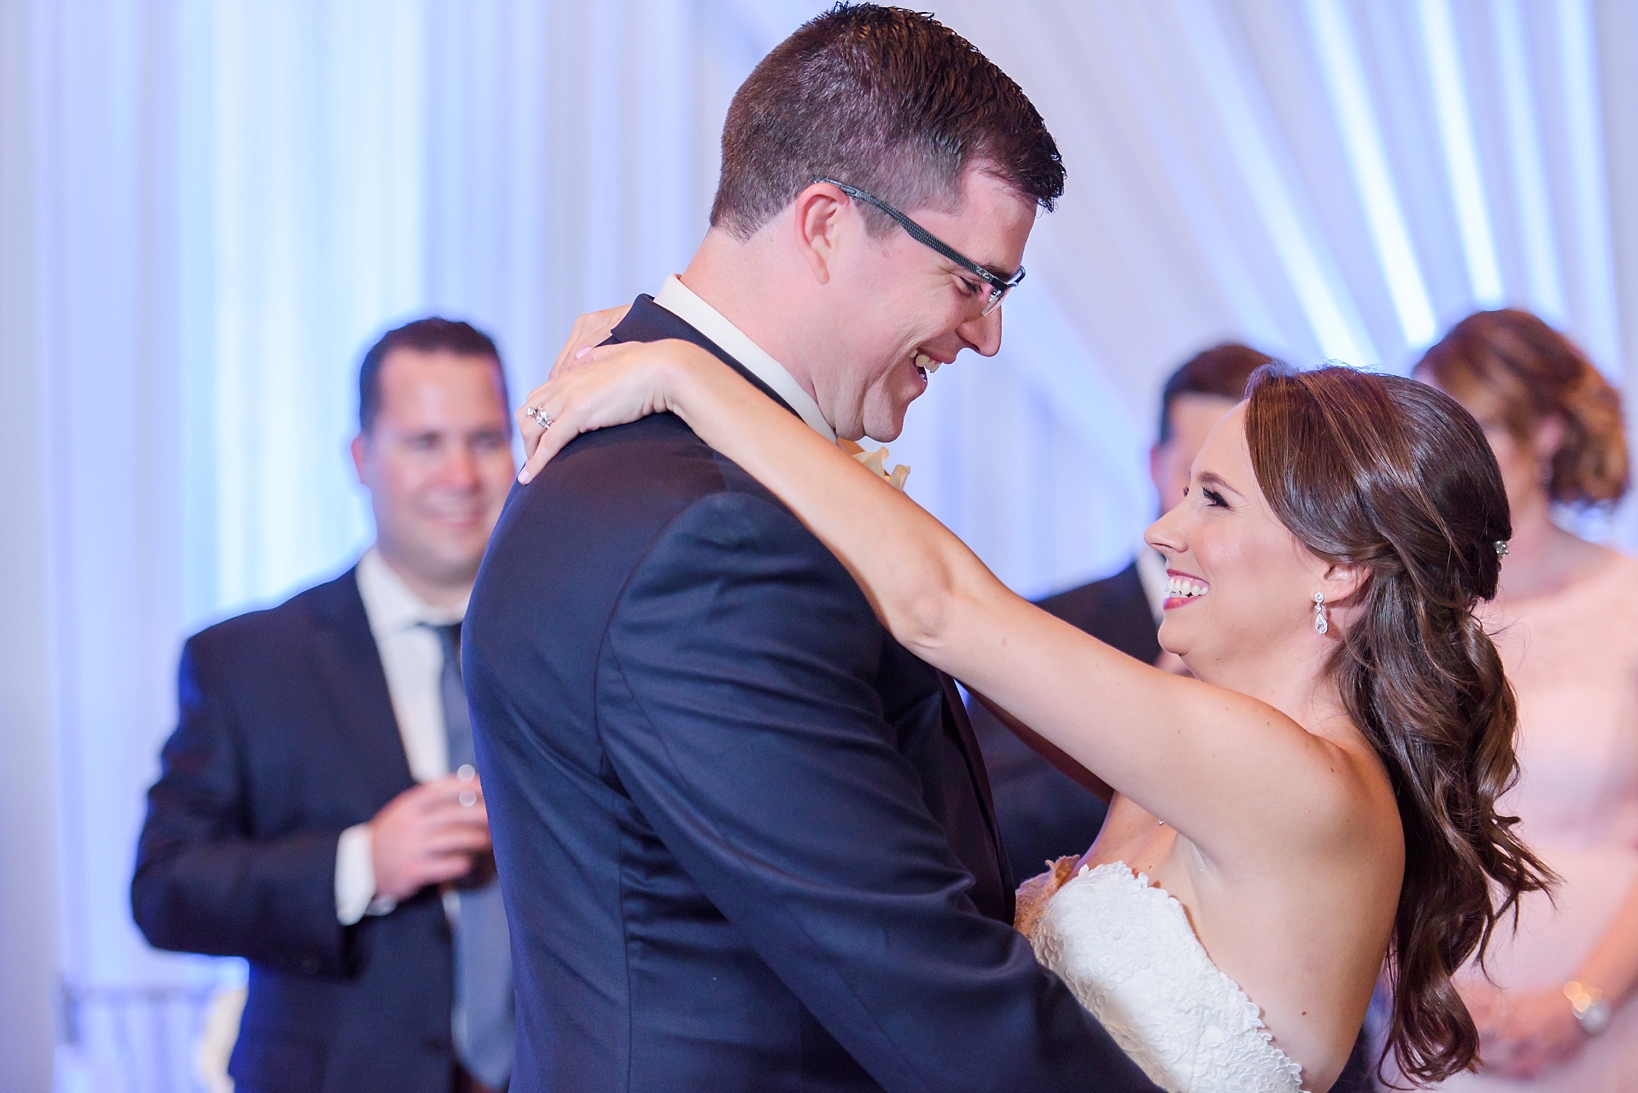 Bride and Groom smiling at each other during their first dance